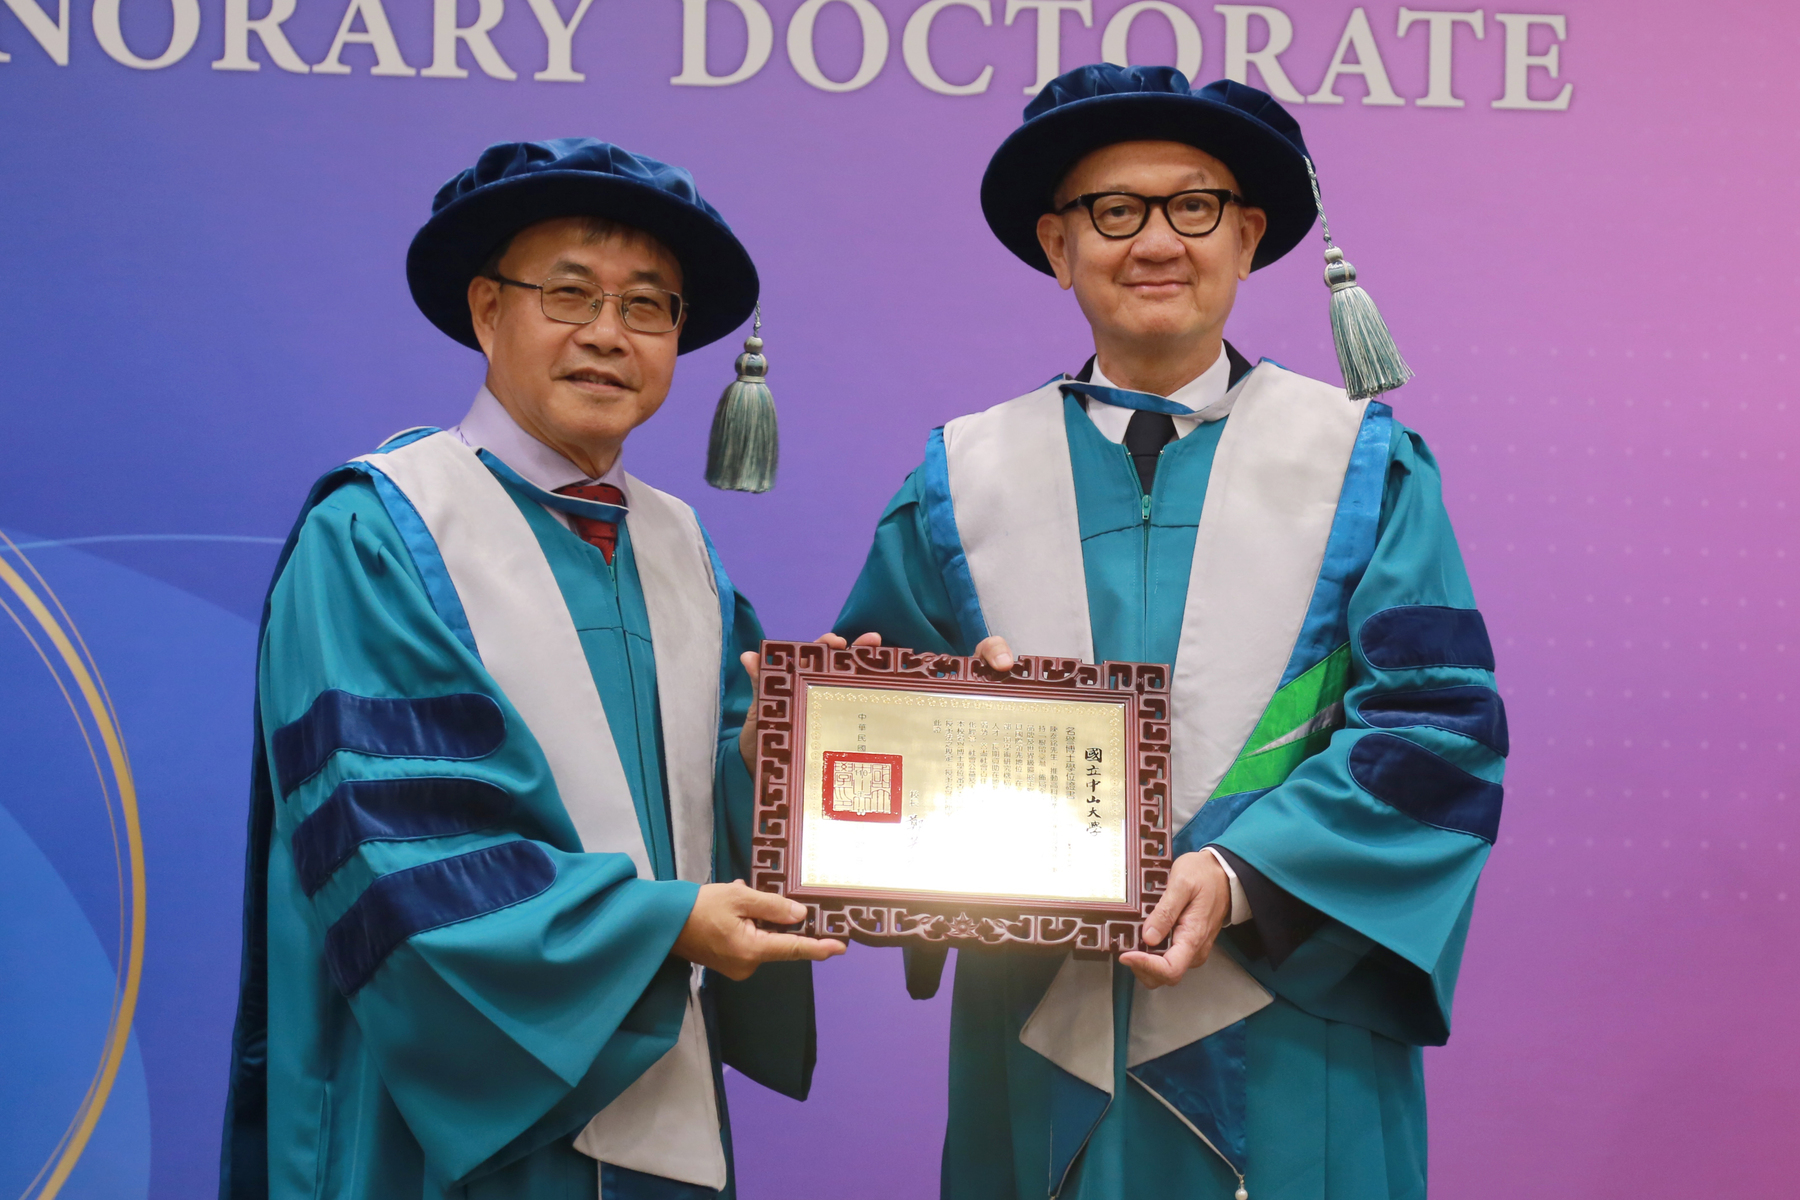 NSYSU President Ying-Yao Cheng (on the left) conferred the Honorary Doctorate in Management to the Chairman of Yageo Corporation Tie-Min Chen (on the right) as a recognition of his outstanding achievements in corporate management, and contributions to international art, education in Taiwan, and social welfare. Mayor of Kaohsiung Chen Chi-Mai participated in the ceremony.